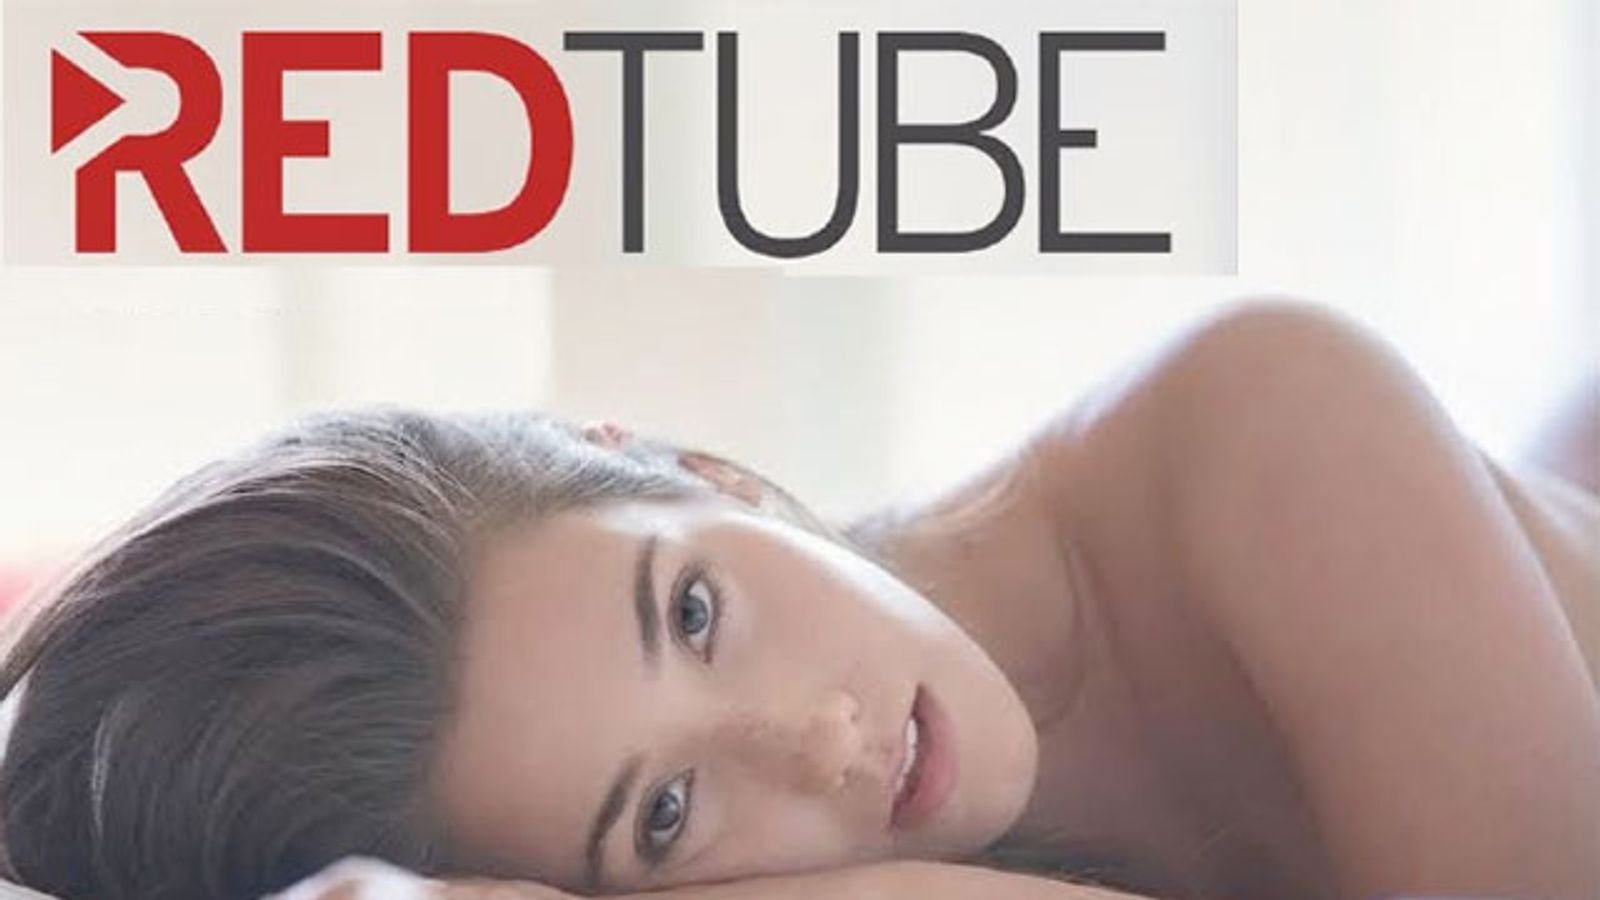 RedTube to Launch Adults-Only Gentlemen's Lifestyle Magazine